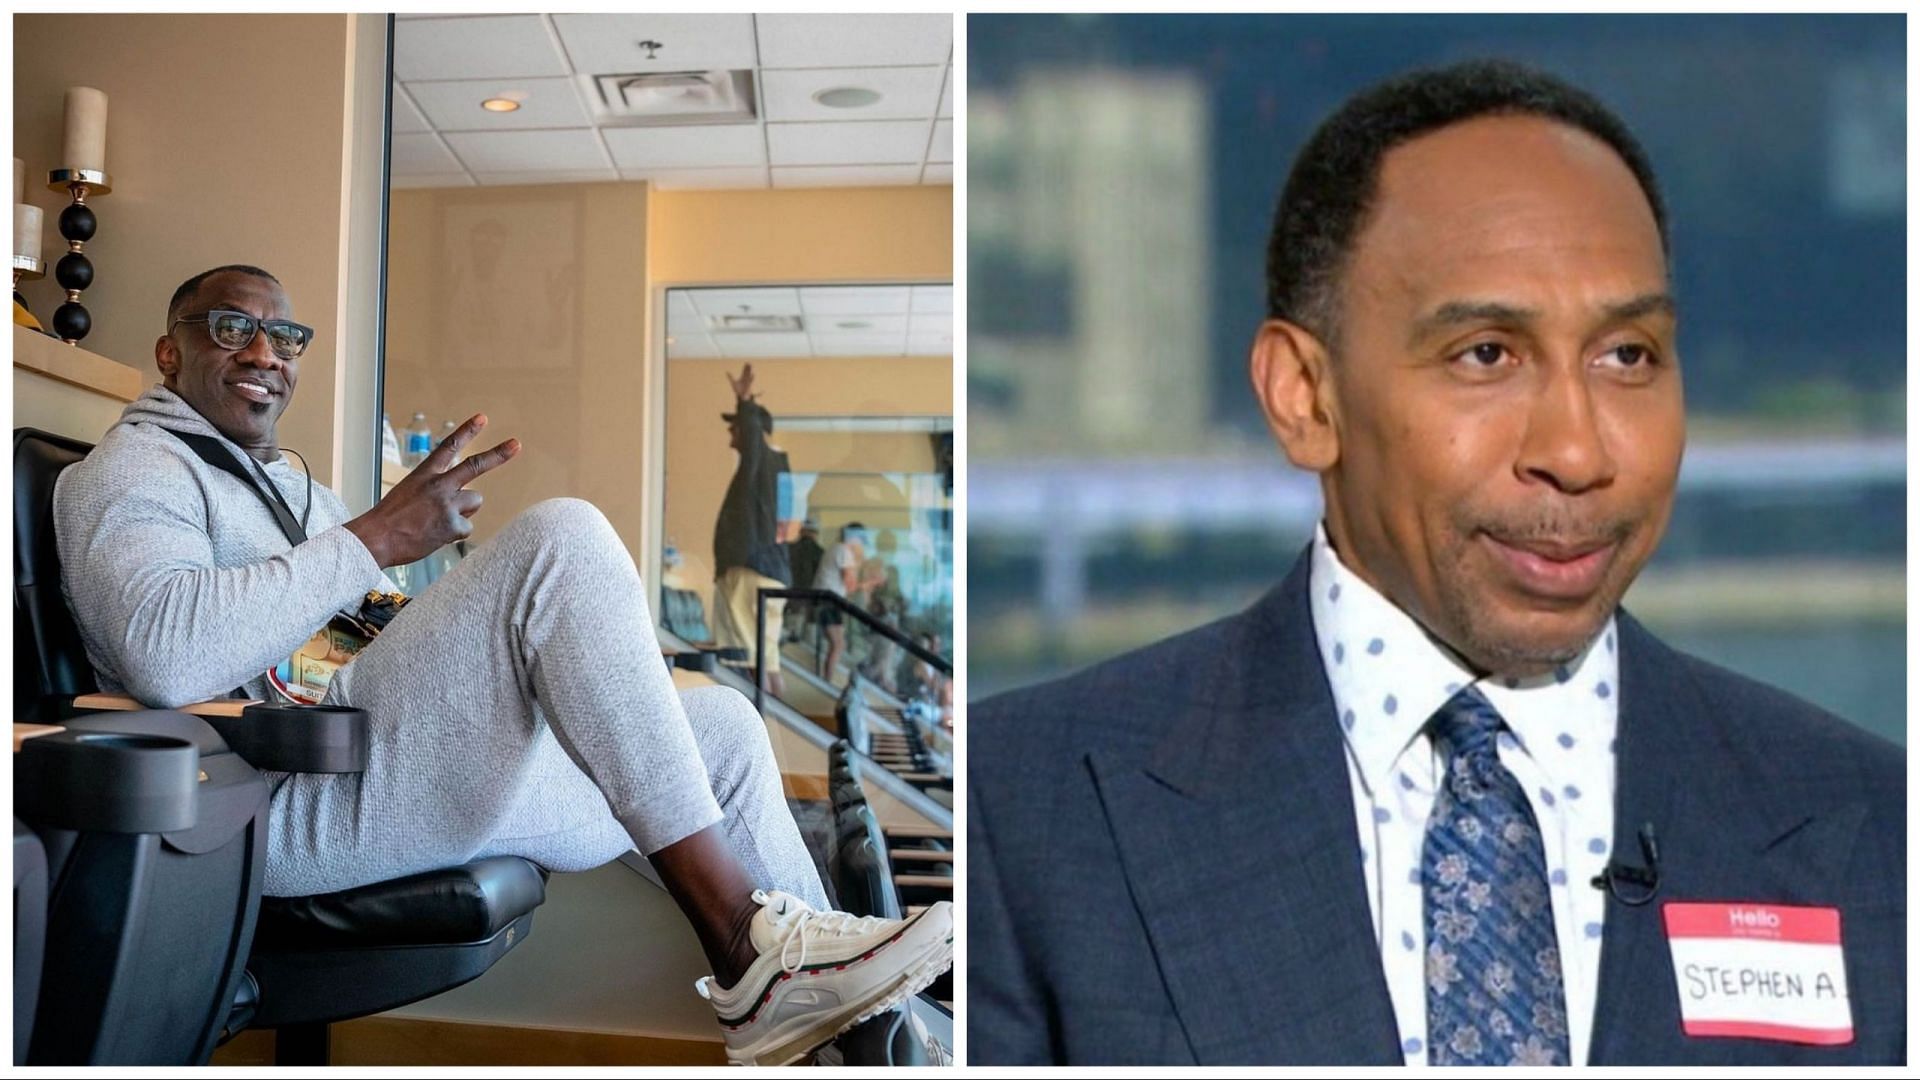 Stephen A. Smith remains unfazed with coaching rivalry against Shannon Sharpe in upcoming NBA All-Star Celebrity Game